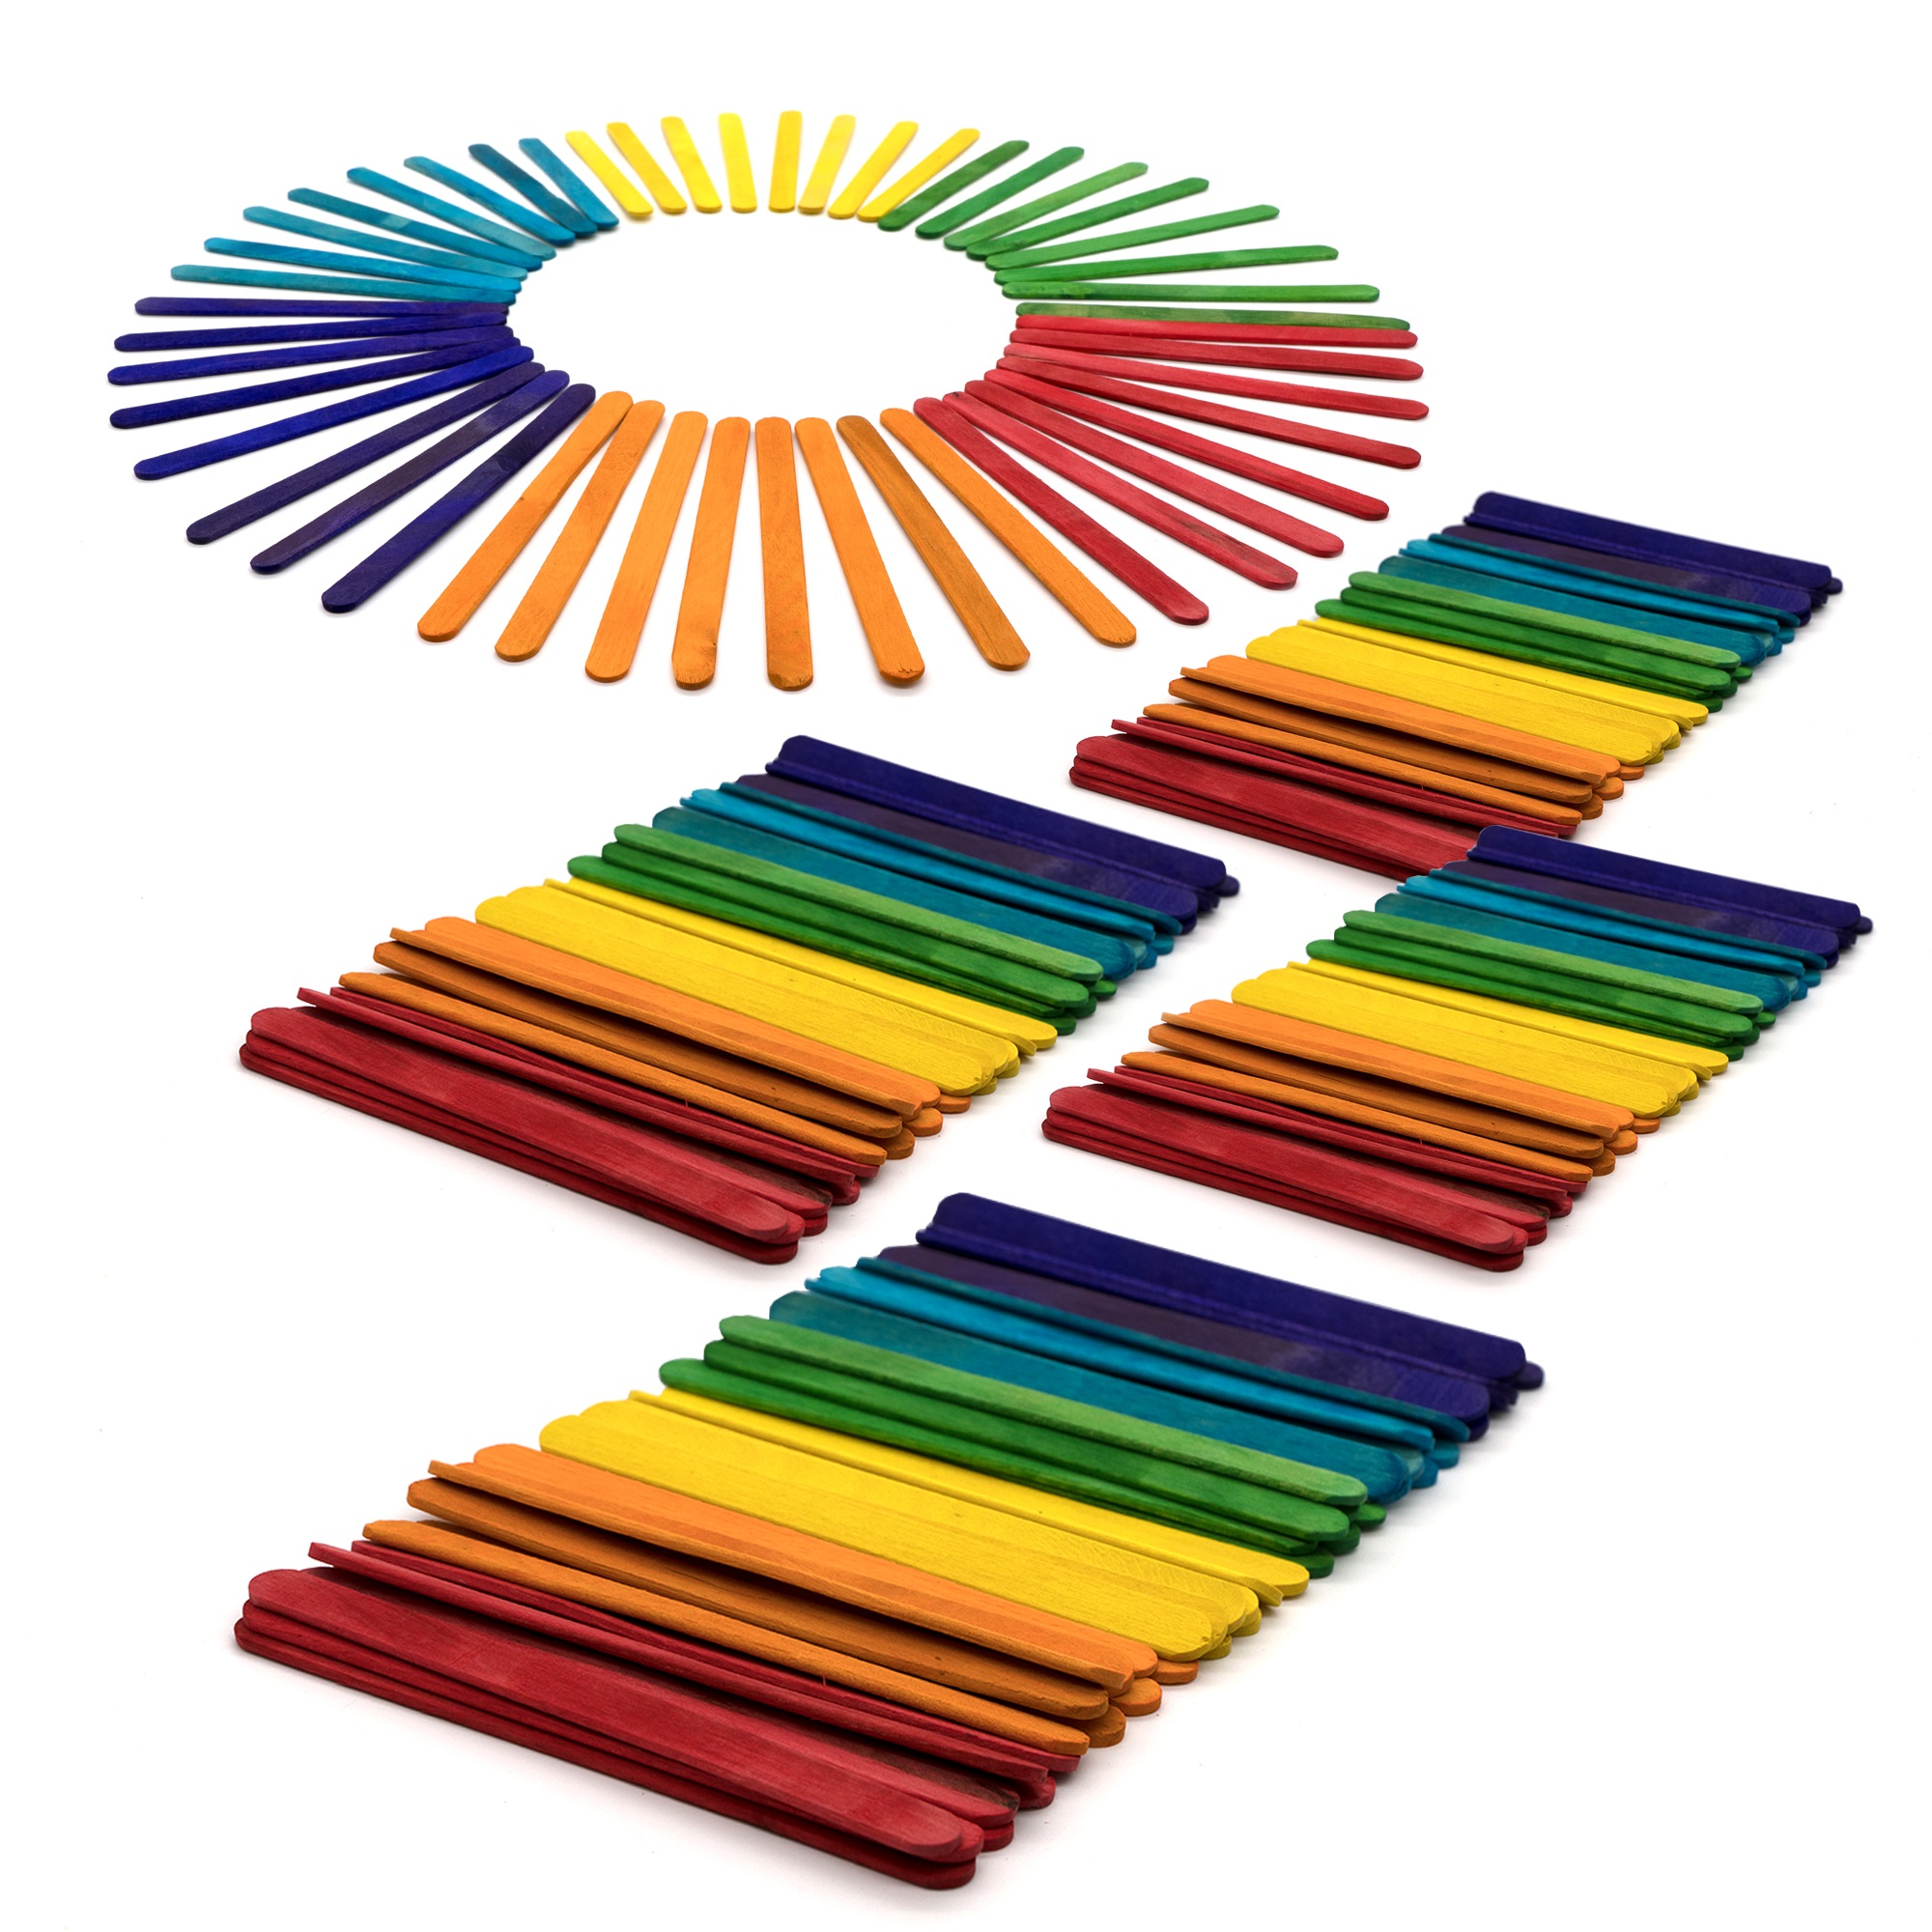 Emraw Colored Craft Sticks Wood Stick 200 Pieces Long Craft Sticks Wood Handles Wedding Fan Craft Sticks Unfinished Natural Wood Craft Ice Cream Popsicle Sticks for Crafts - image 1 of 6